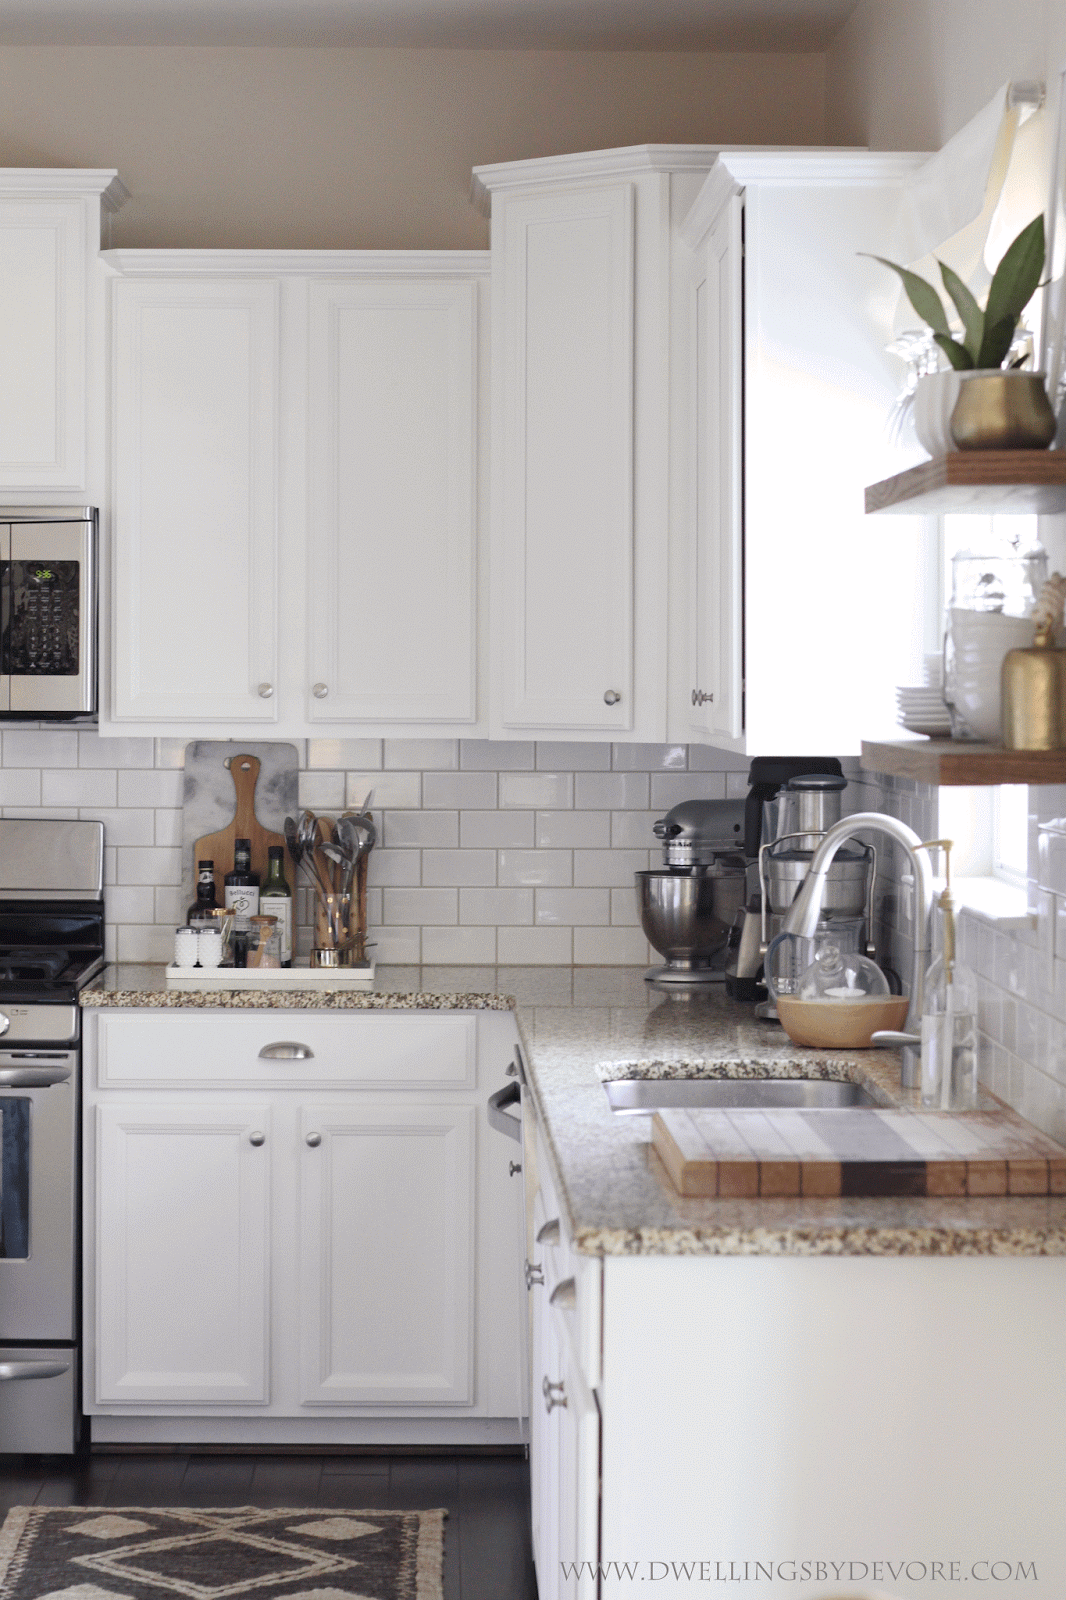 Dwellings By DeVore: Budget Kitchen Makeover